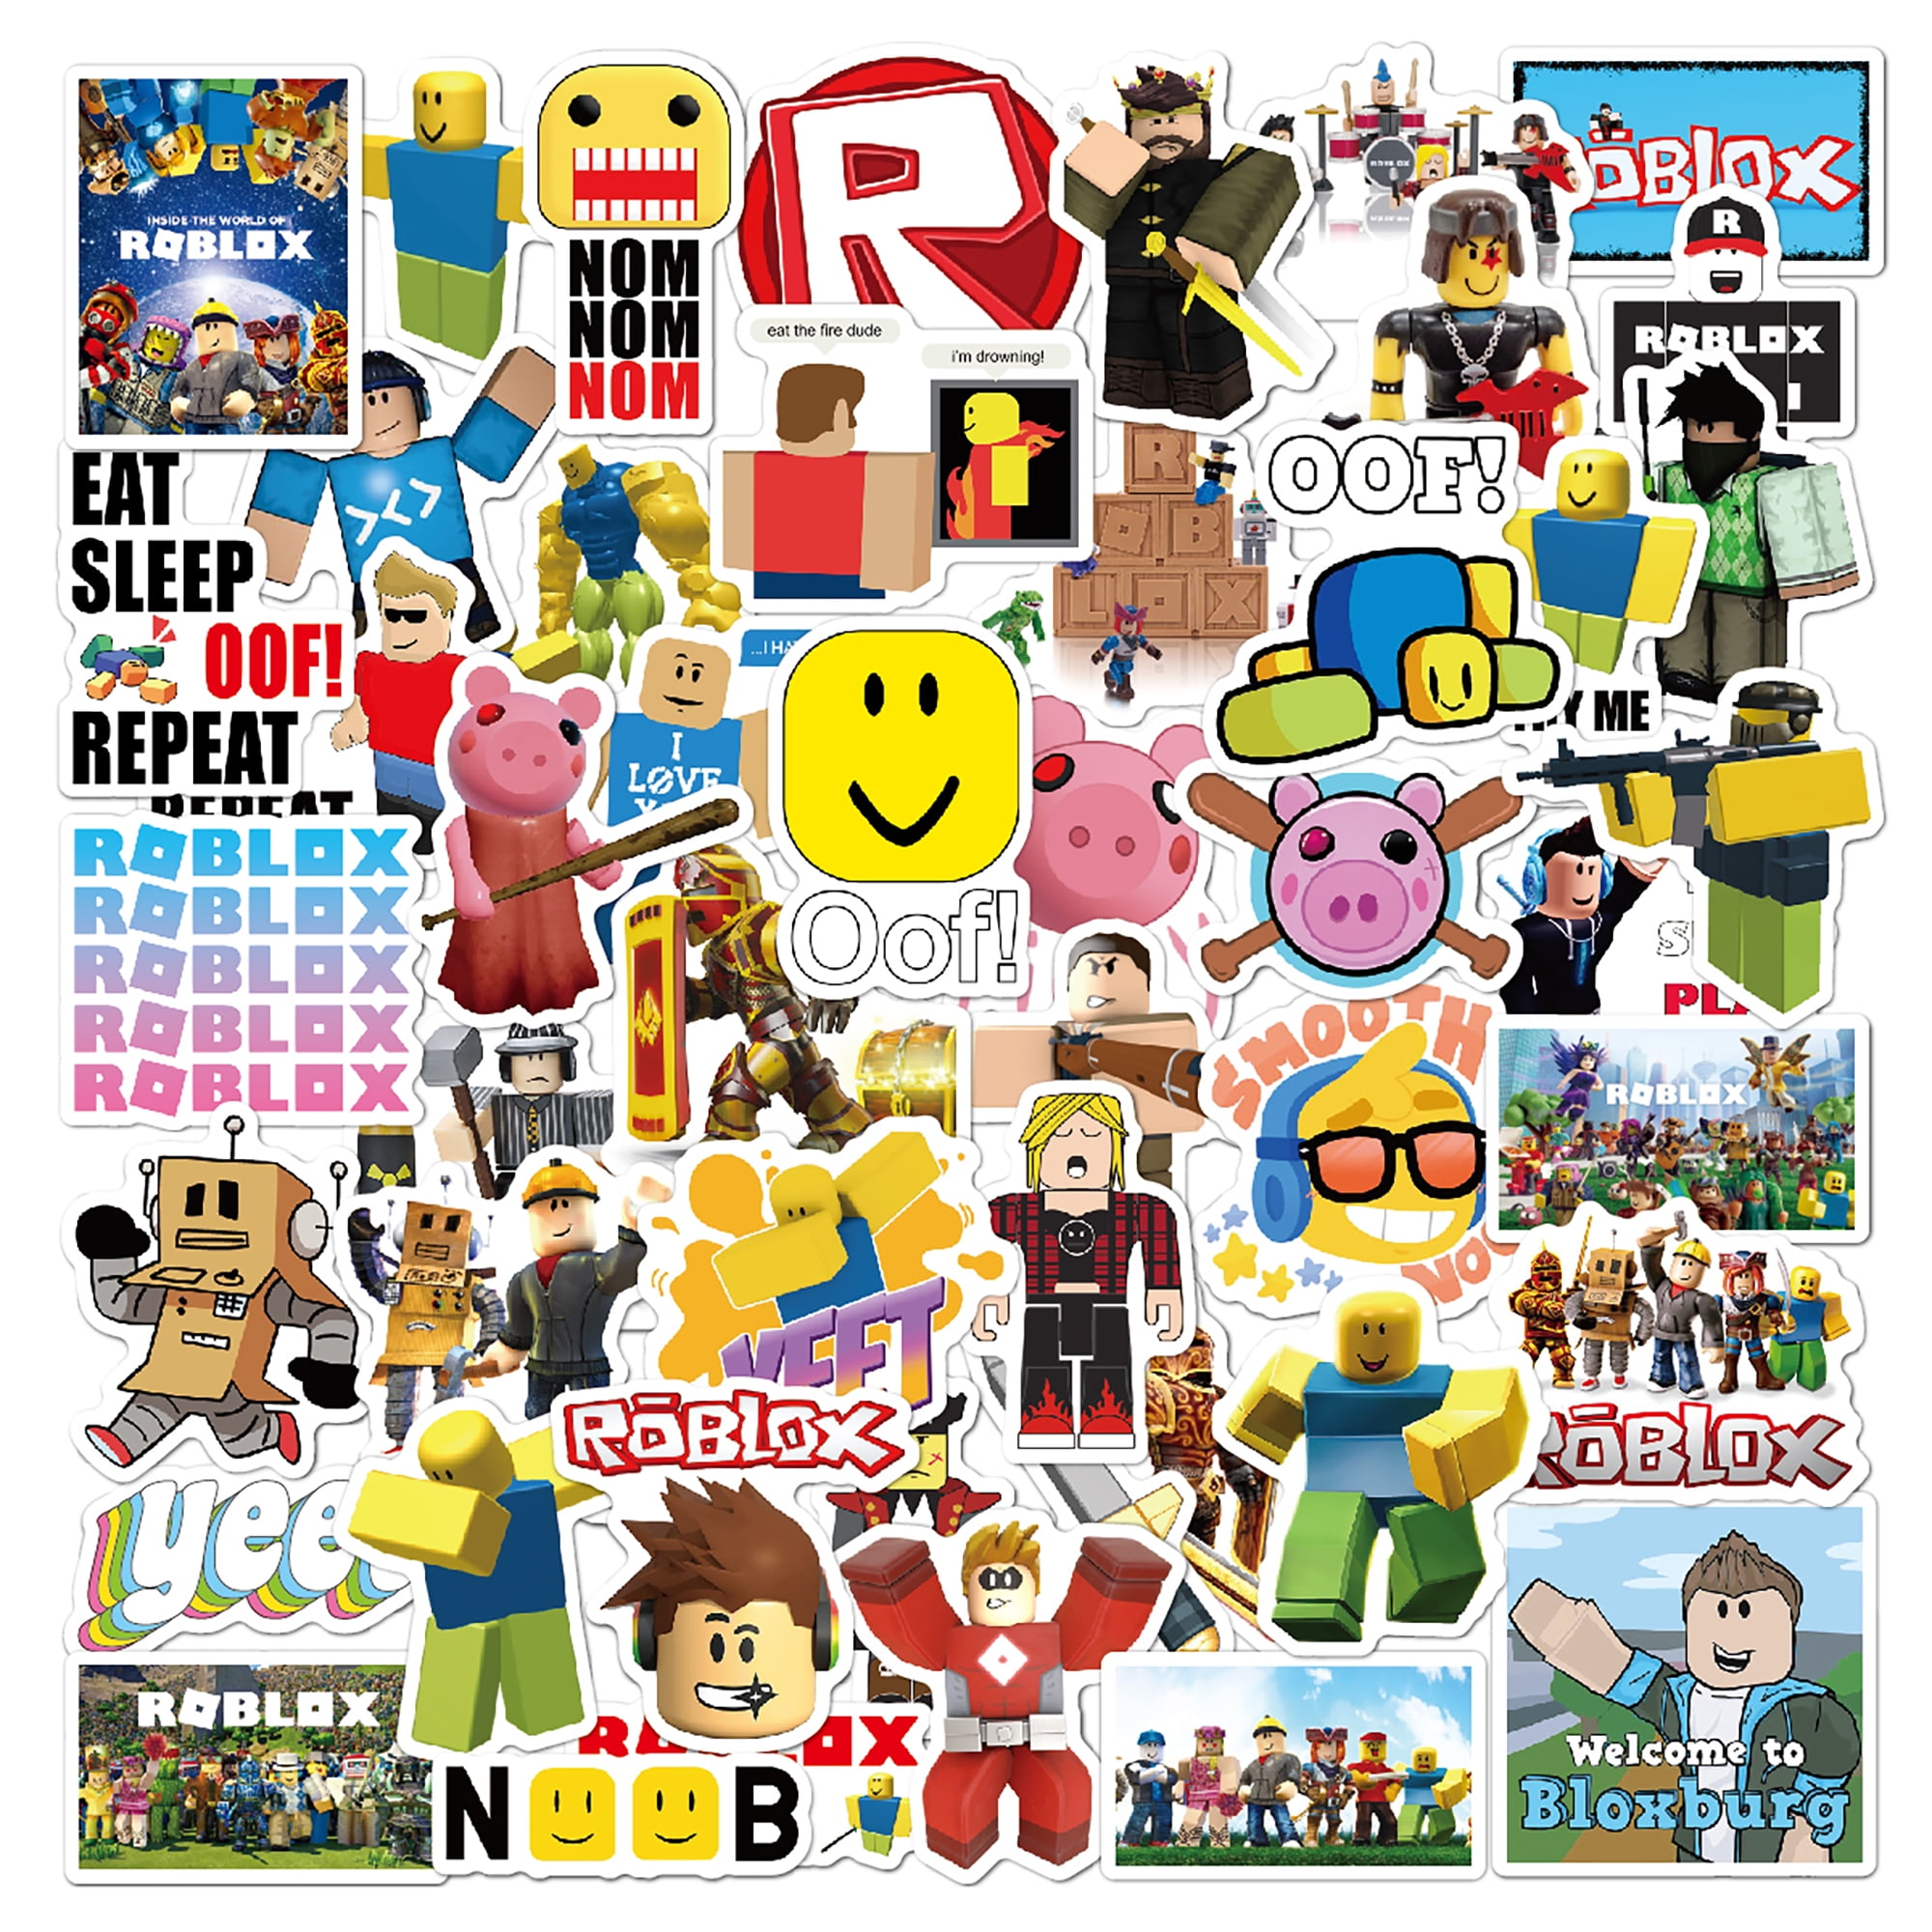 Roblox Sticker Pack 100pcs Sticker Decals Best Gift For Kids Children Teens Waterproof Online Gaming Stickers Pack For Home Decor Phone Hydro Flasks Water Bottle Bicycle Skateboard Laptop Pads Luggage Walmart Com Walmart Com - electric state decals roblox 2021